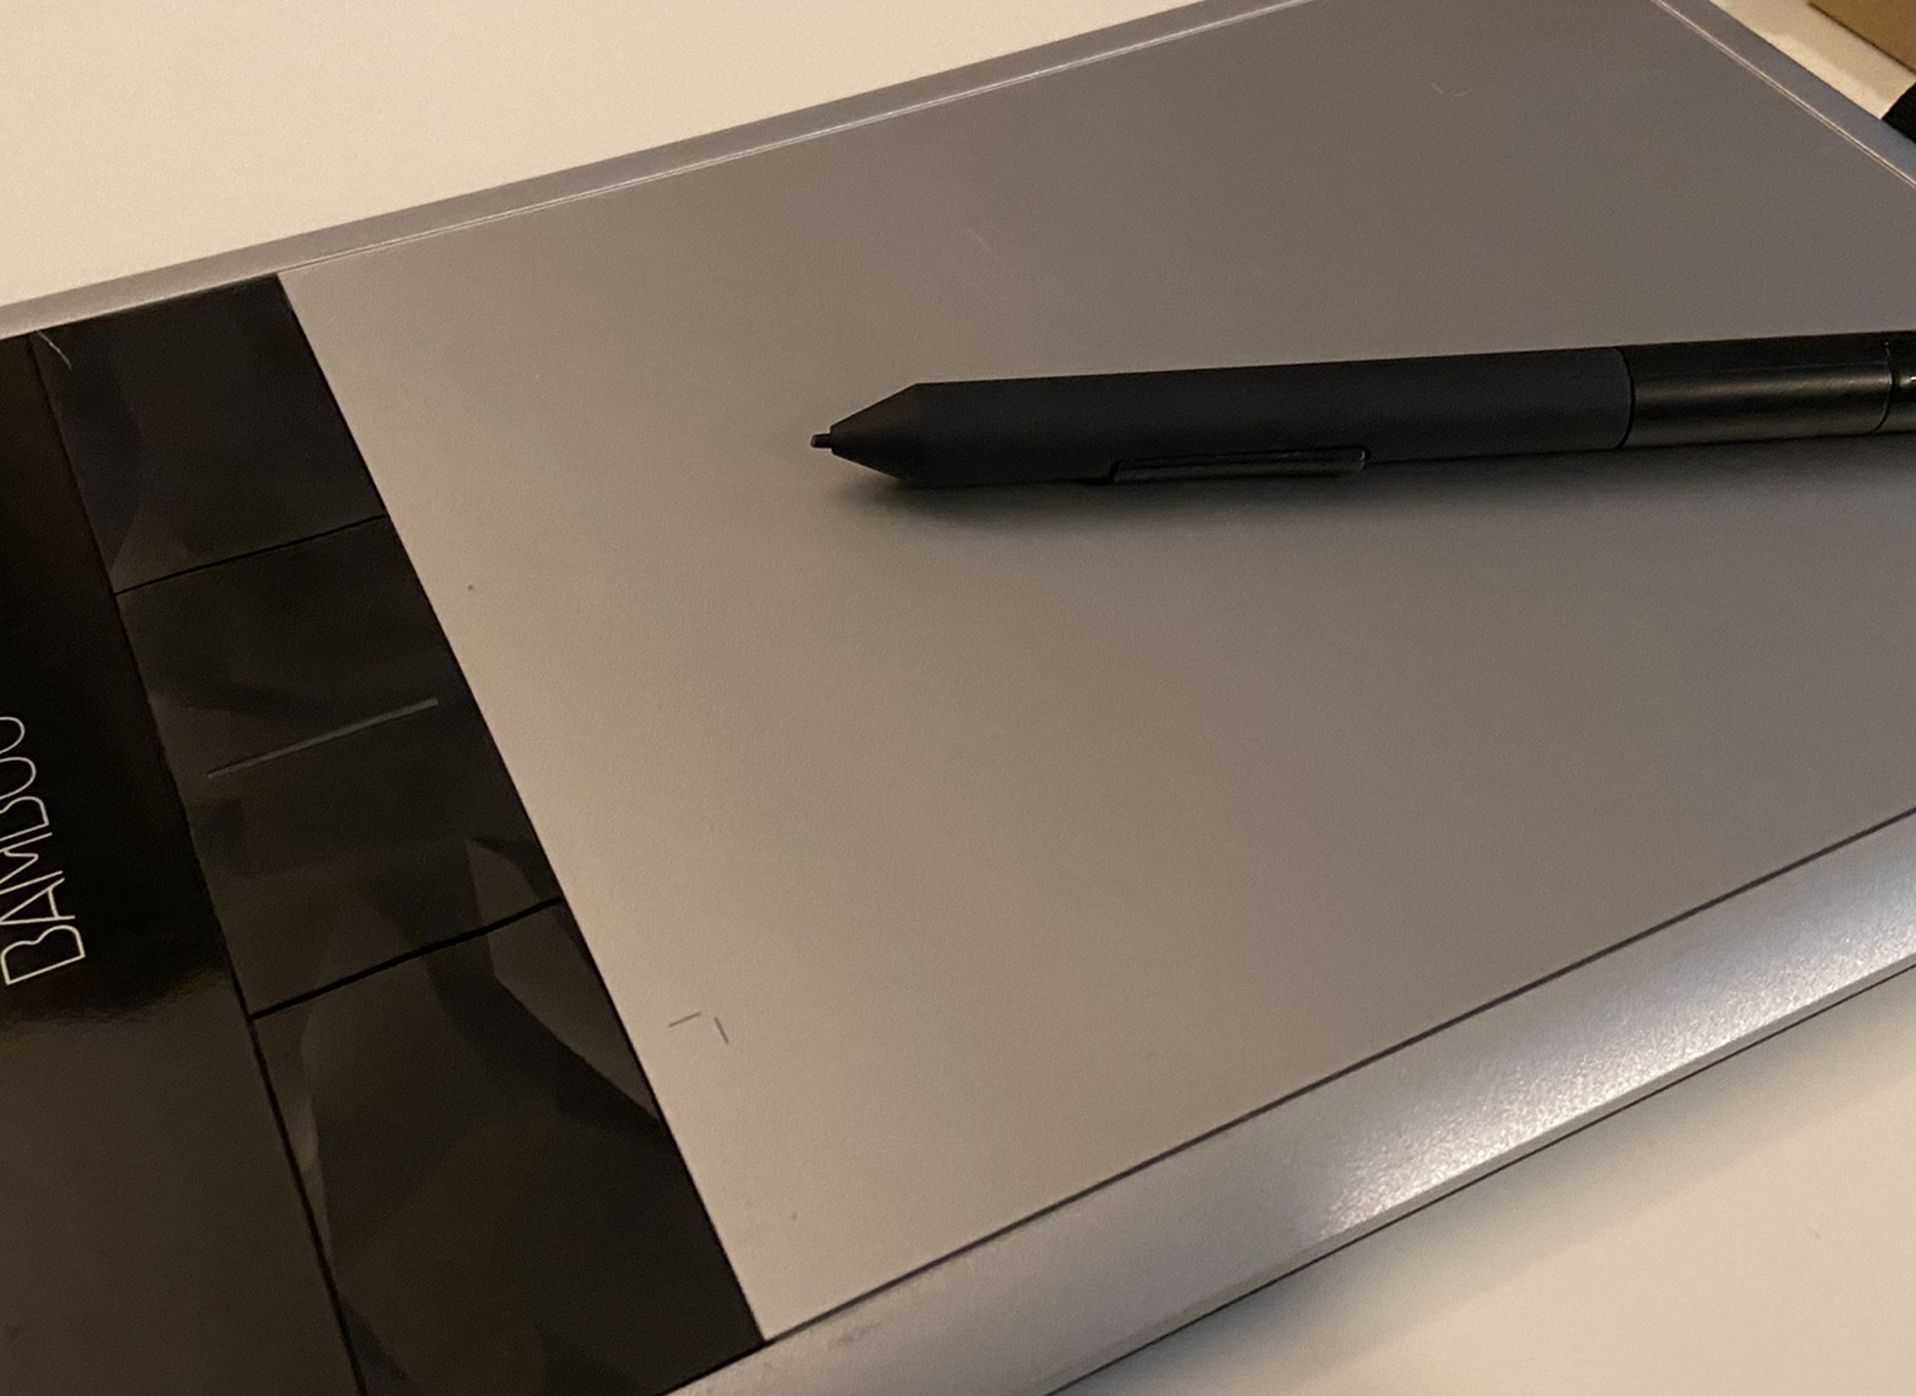 Wacom Bamboo Tablet with Stylus